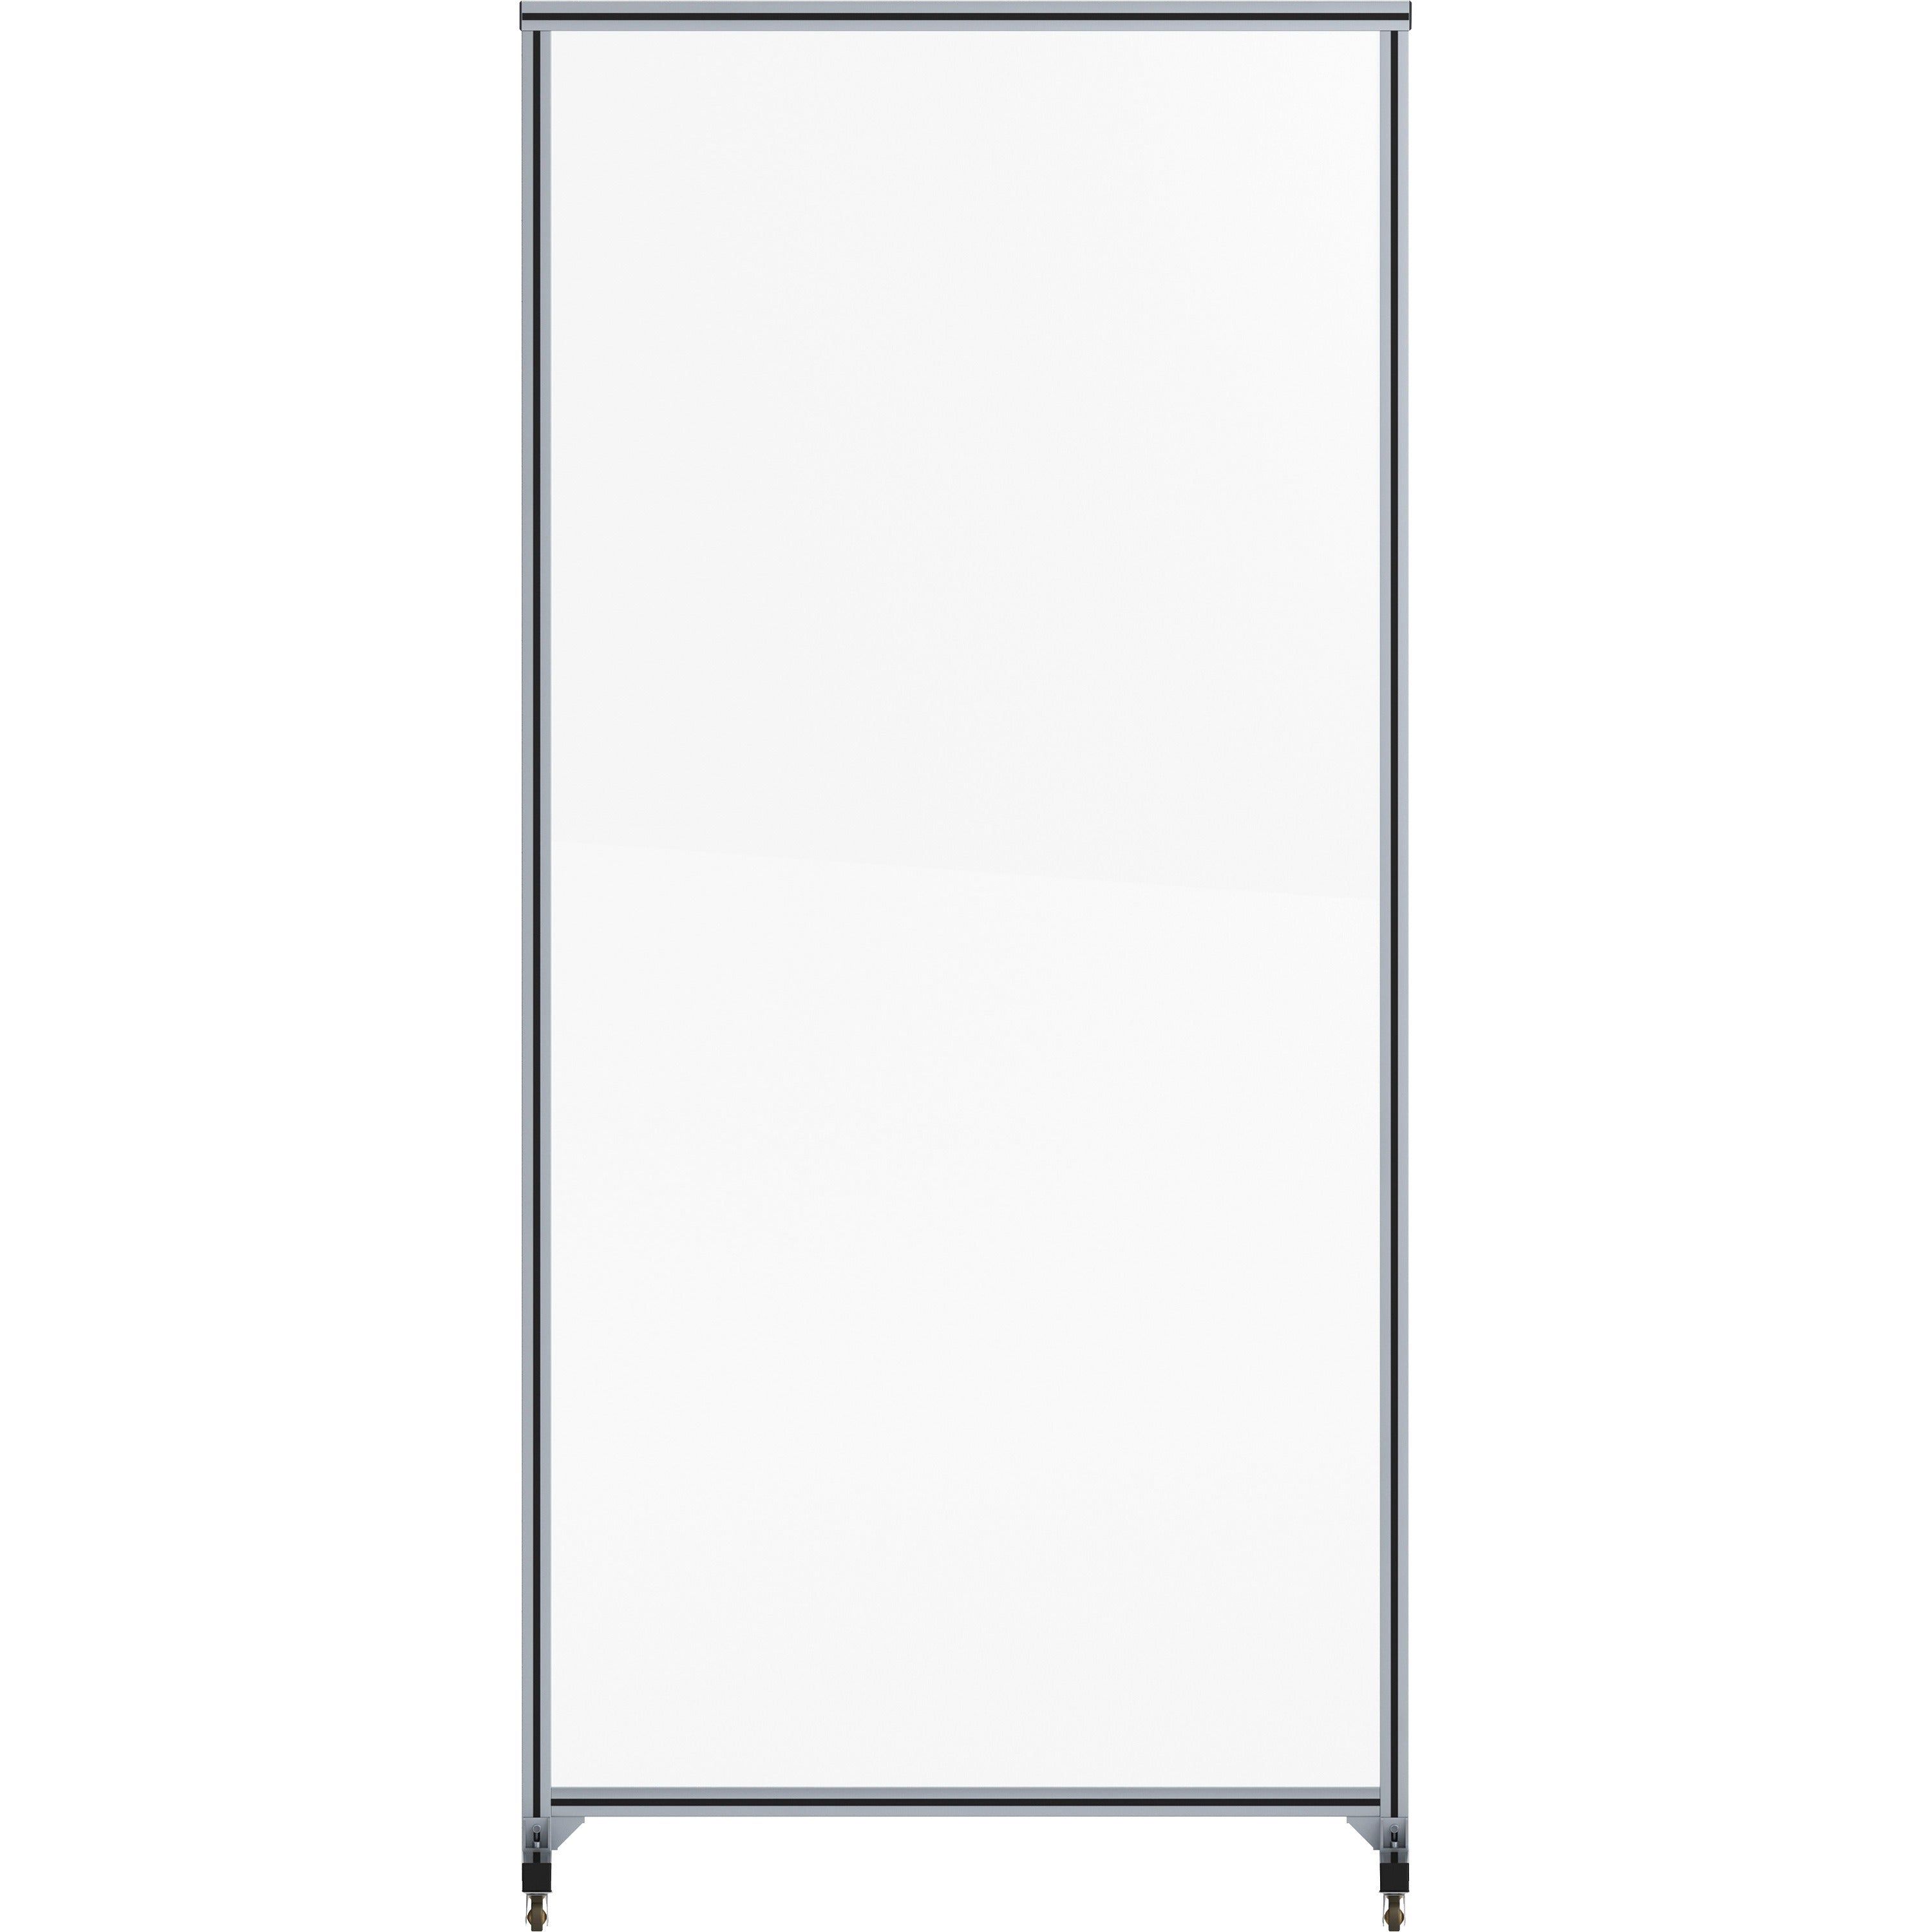 lorell-mobile-full-protective-glass-screen-36-width-x-03-depth-x-78-height-1-each-clear-tempered-glass-aluminum_llr55673 - 3